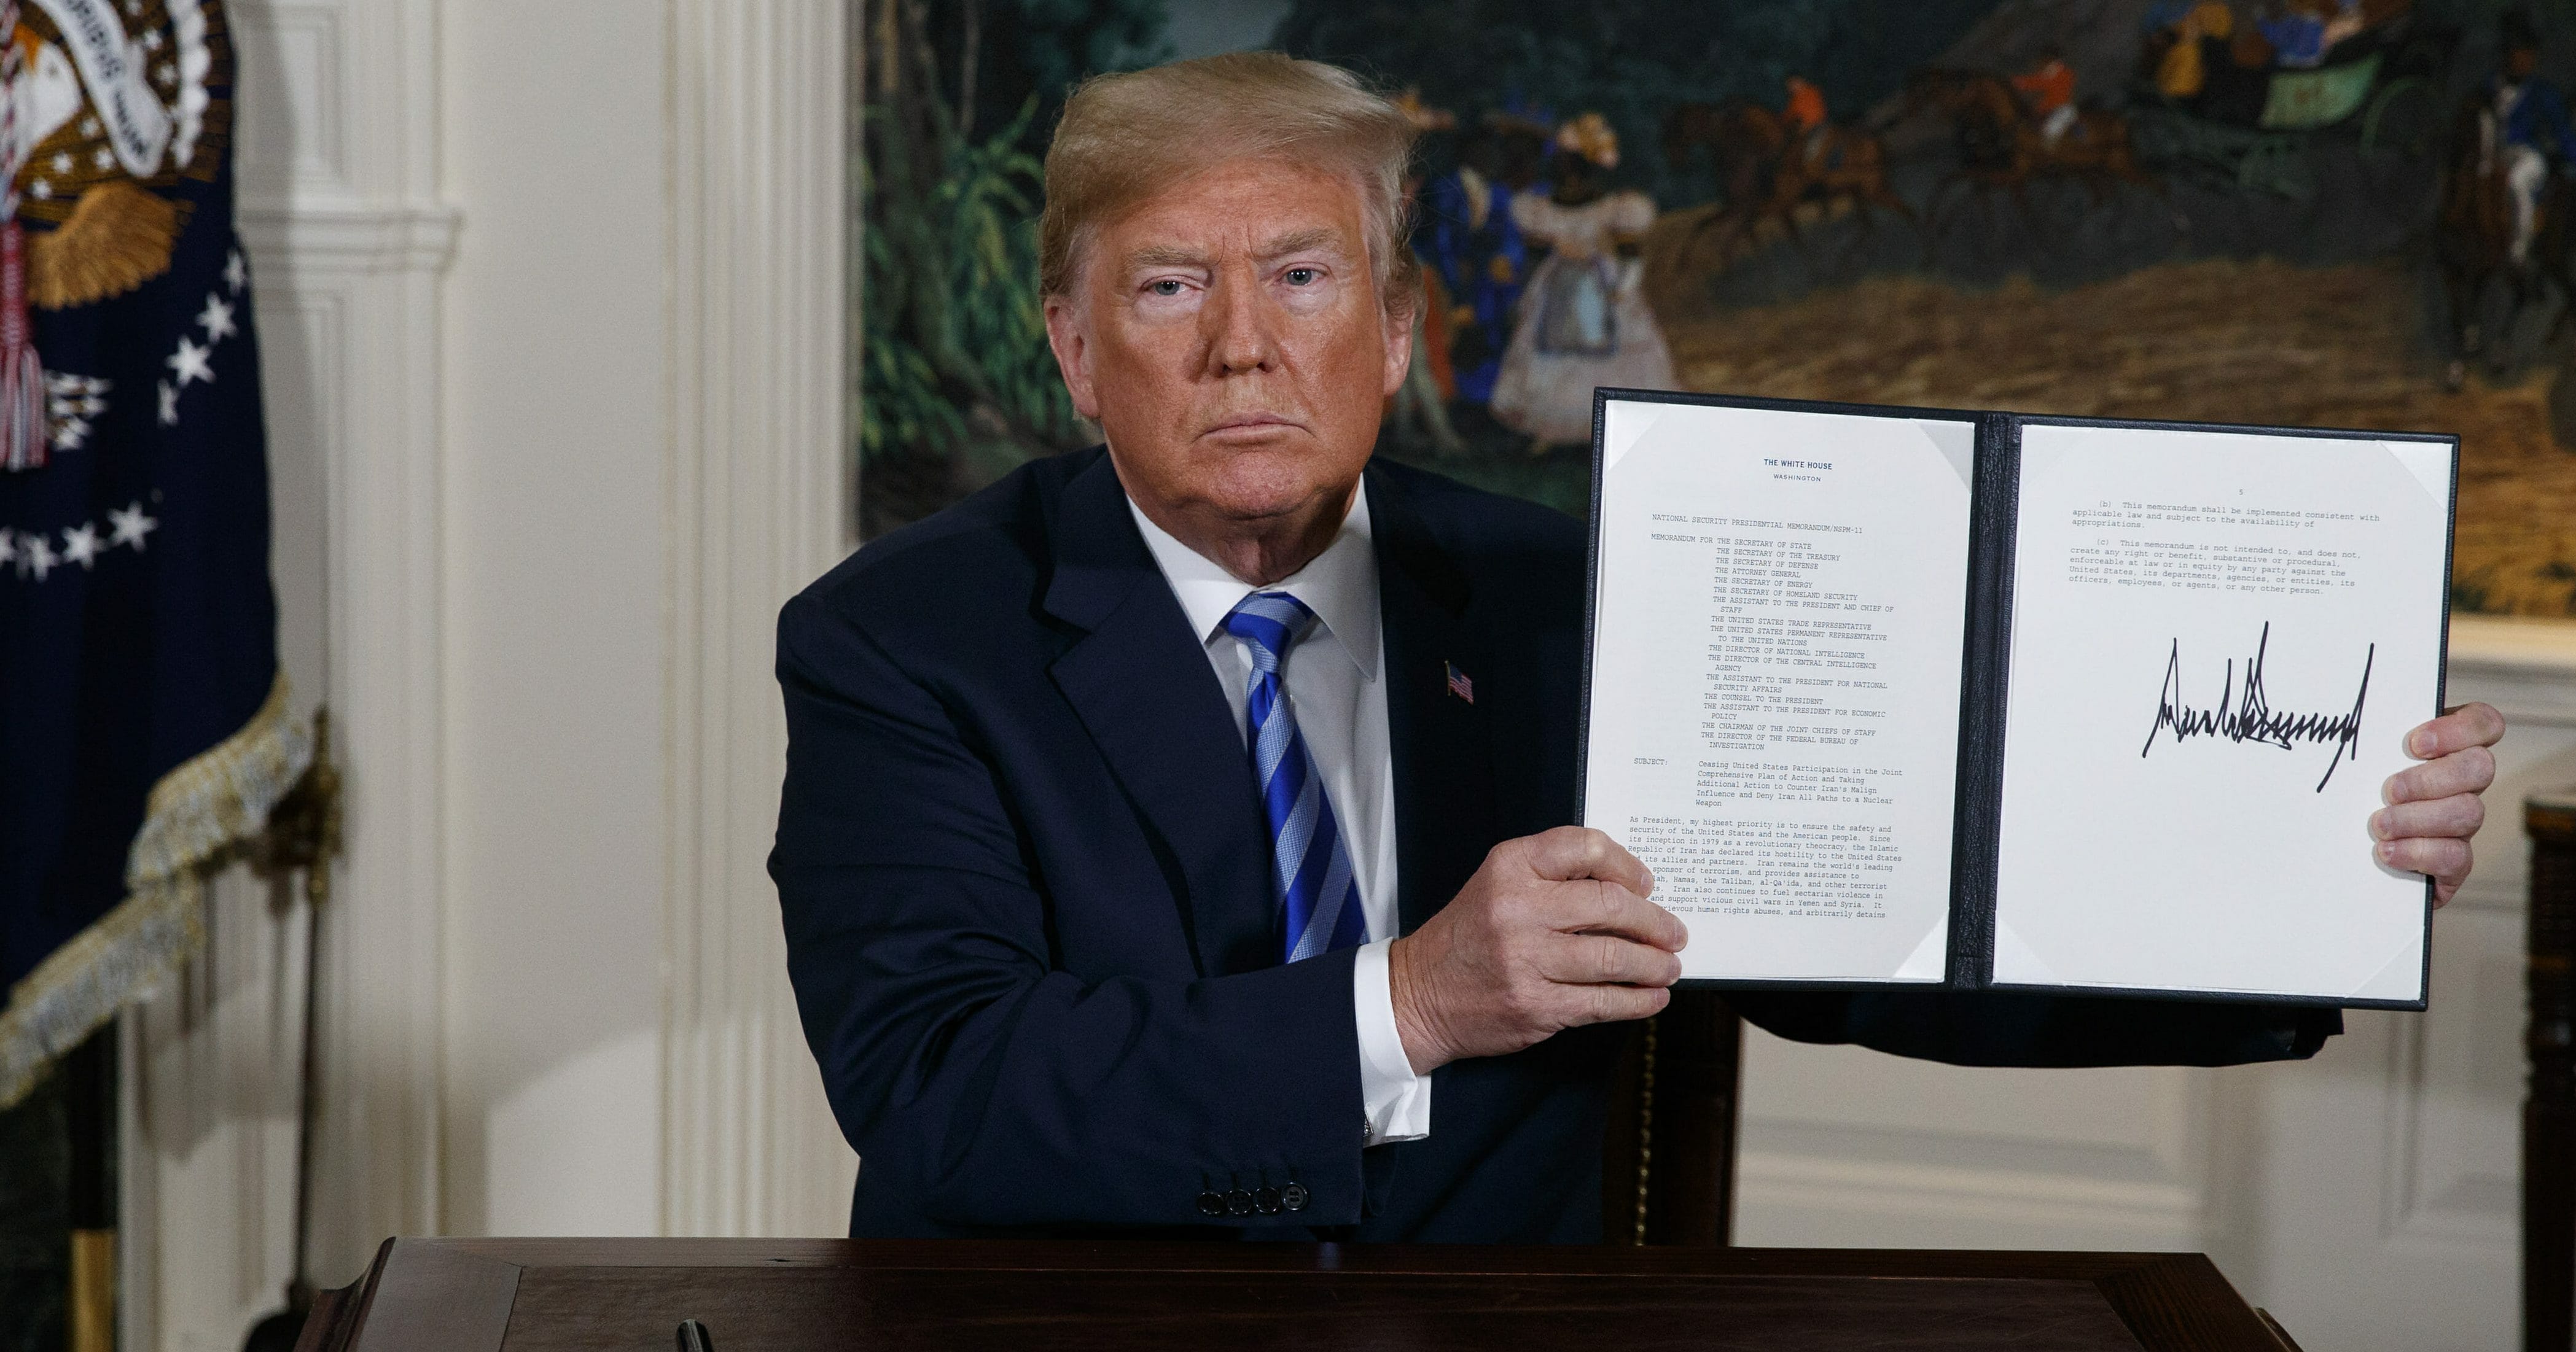 President Donald Trump shows a signed Presidential Memorandum after delivering a statement on the Iran nuclear deal in the White House on May 8, 2018.